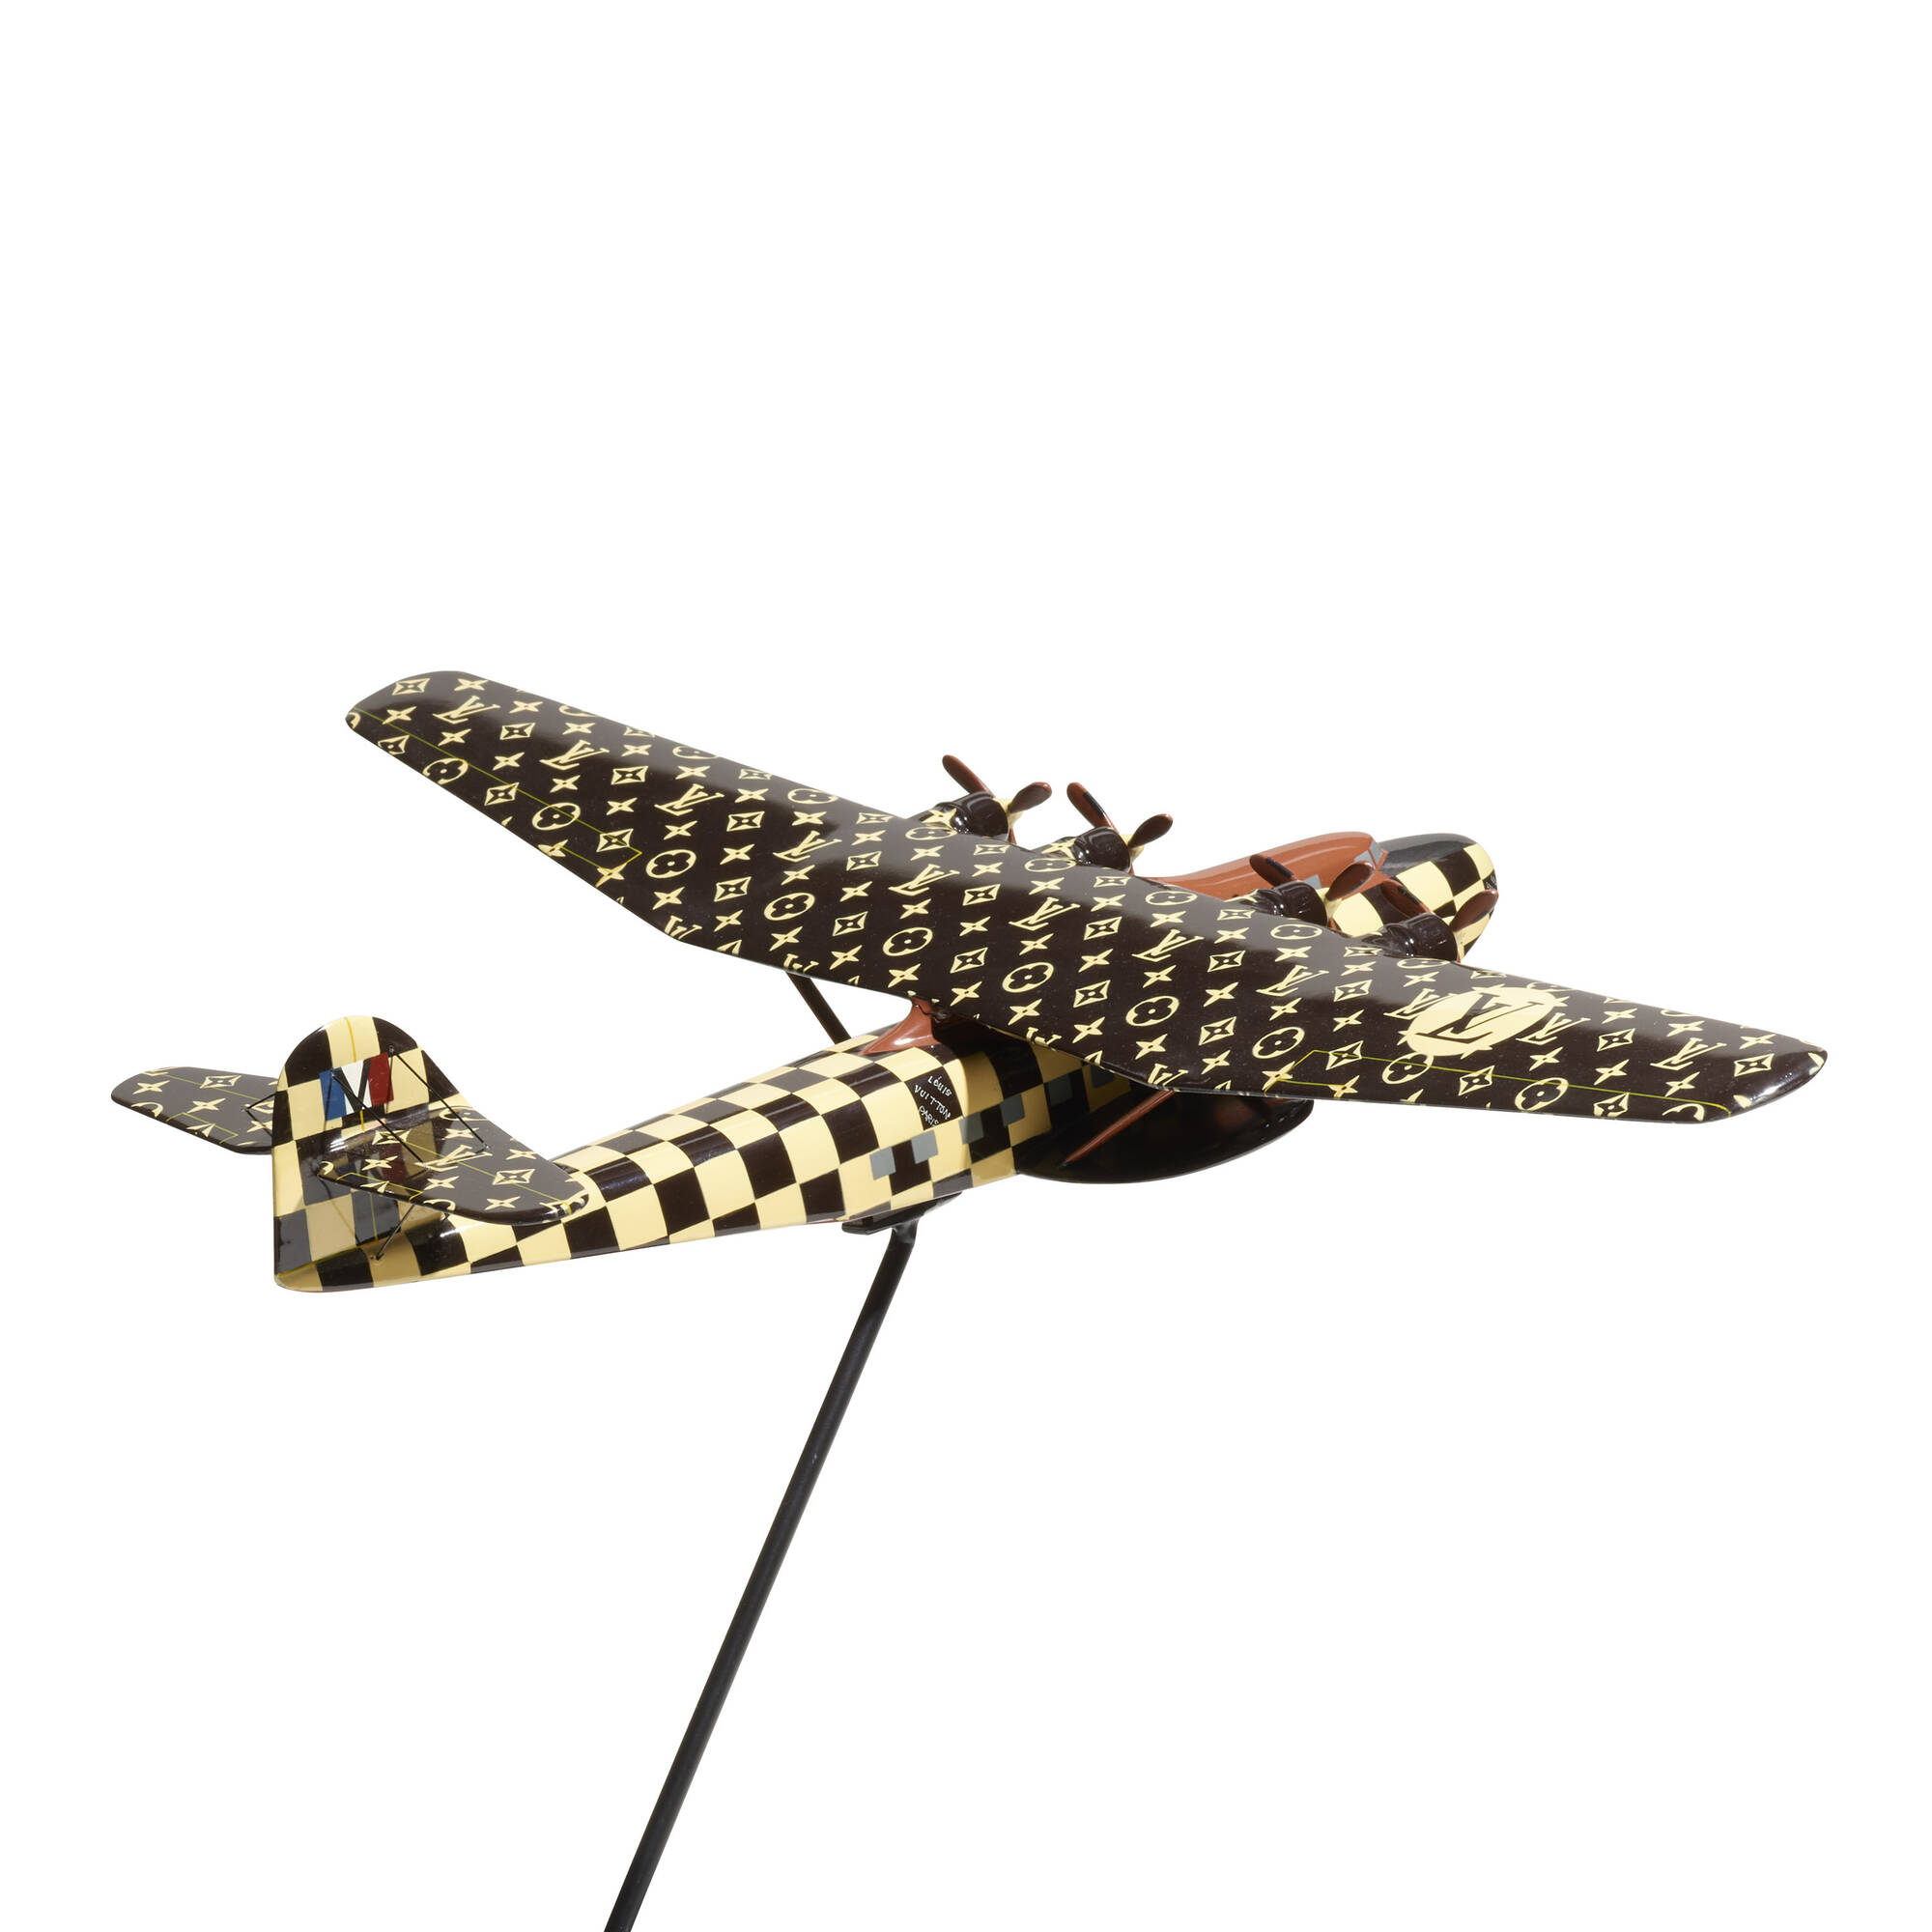 113: LOUIS VUITTON, Airplane model < A Century of Luxury & Design, 22 July  2020 < Auctions